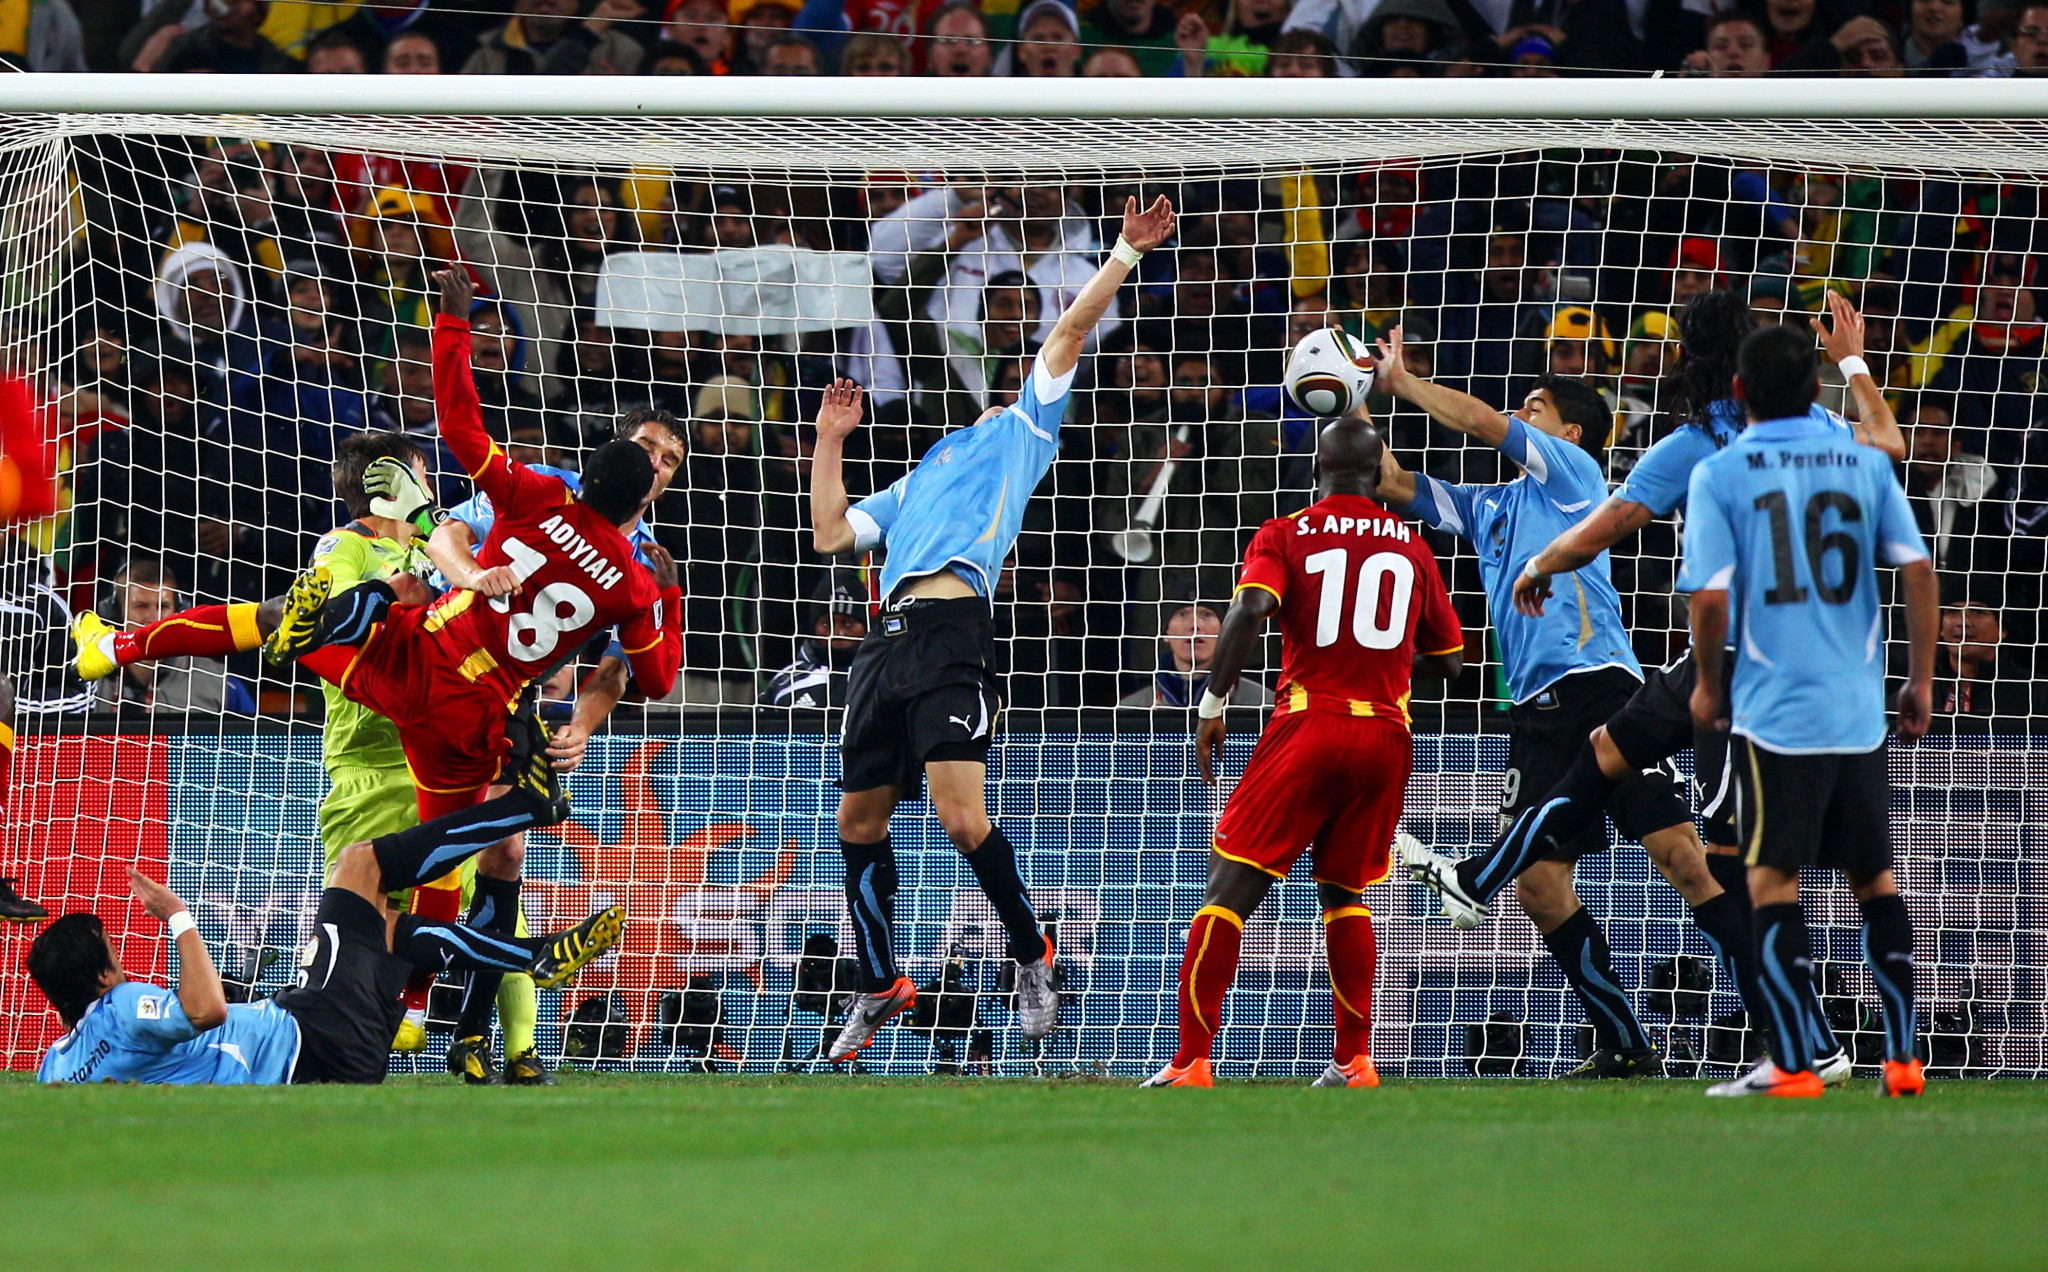 Luis Suarez's famous deliberate handball stopped Ghana progressing to the World Cup semi-finals ©Getty Images